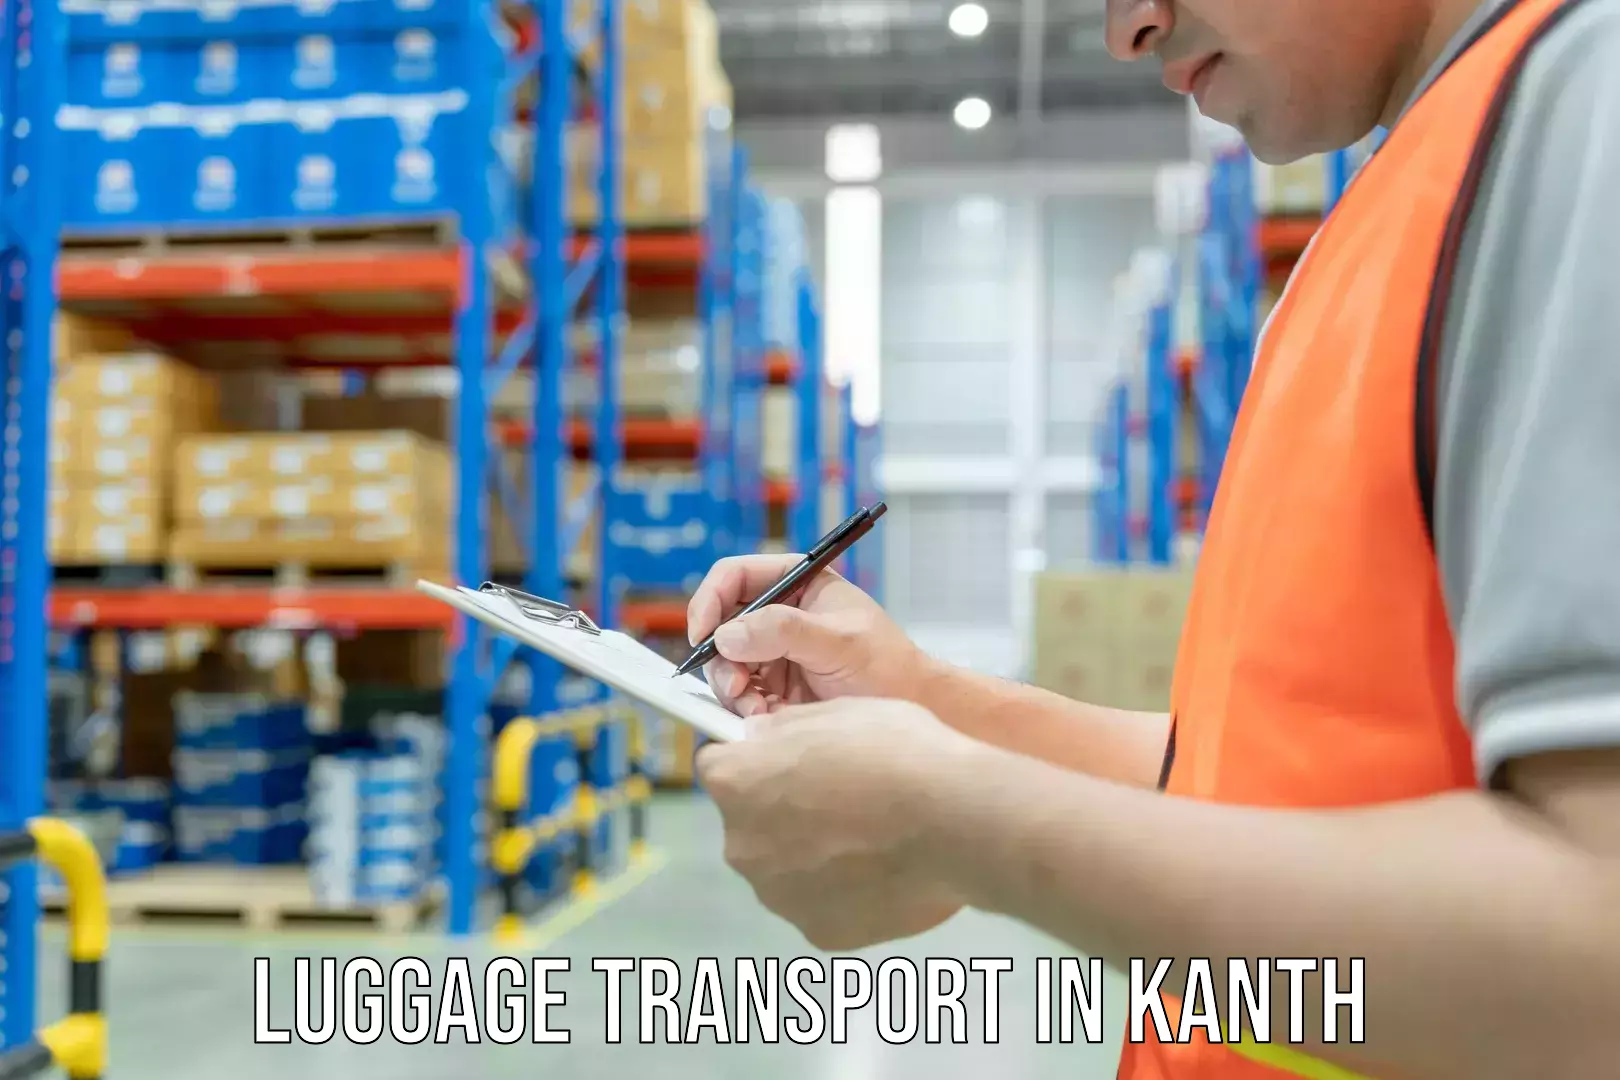 Luggage transport rates in Kanth